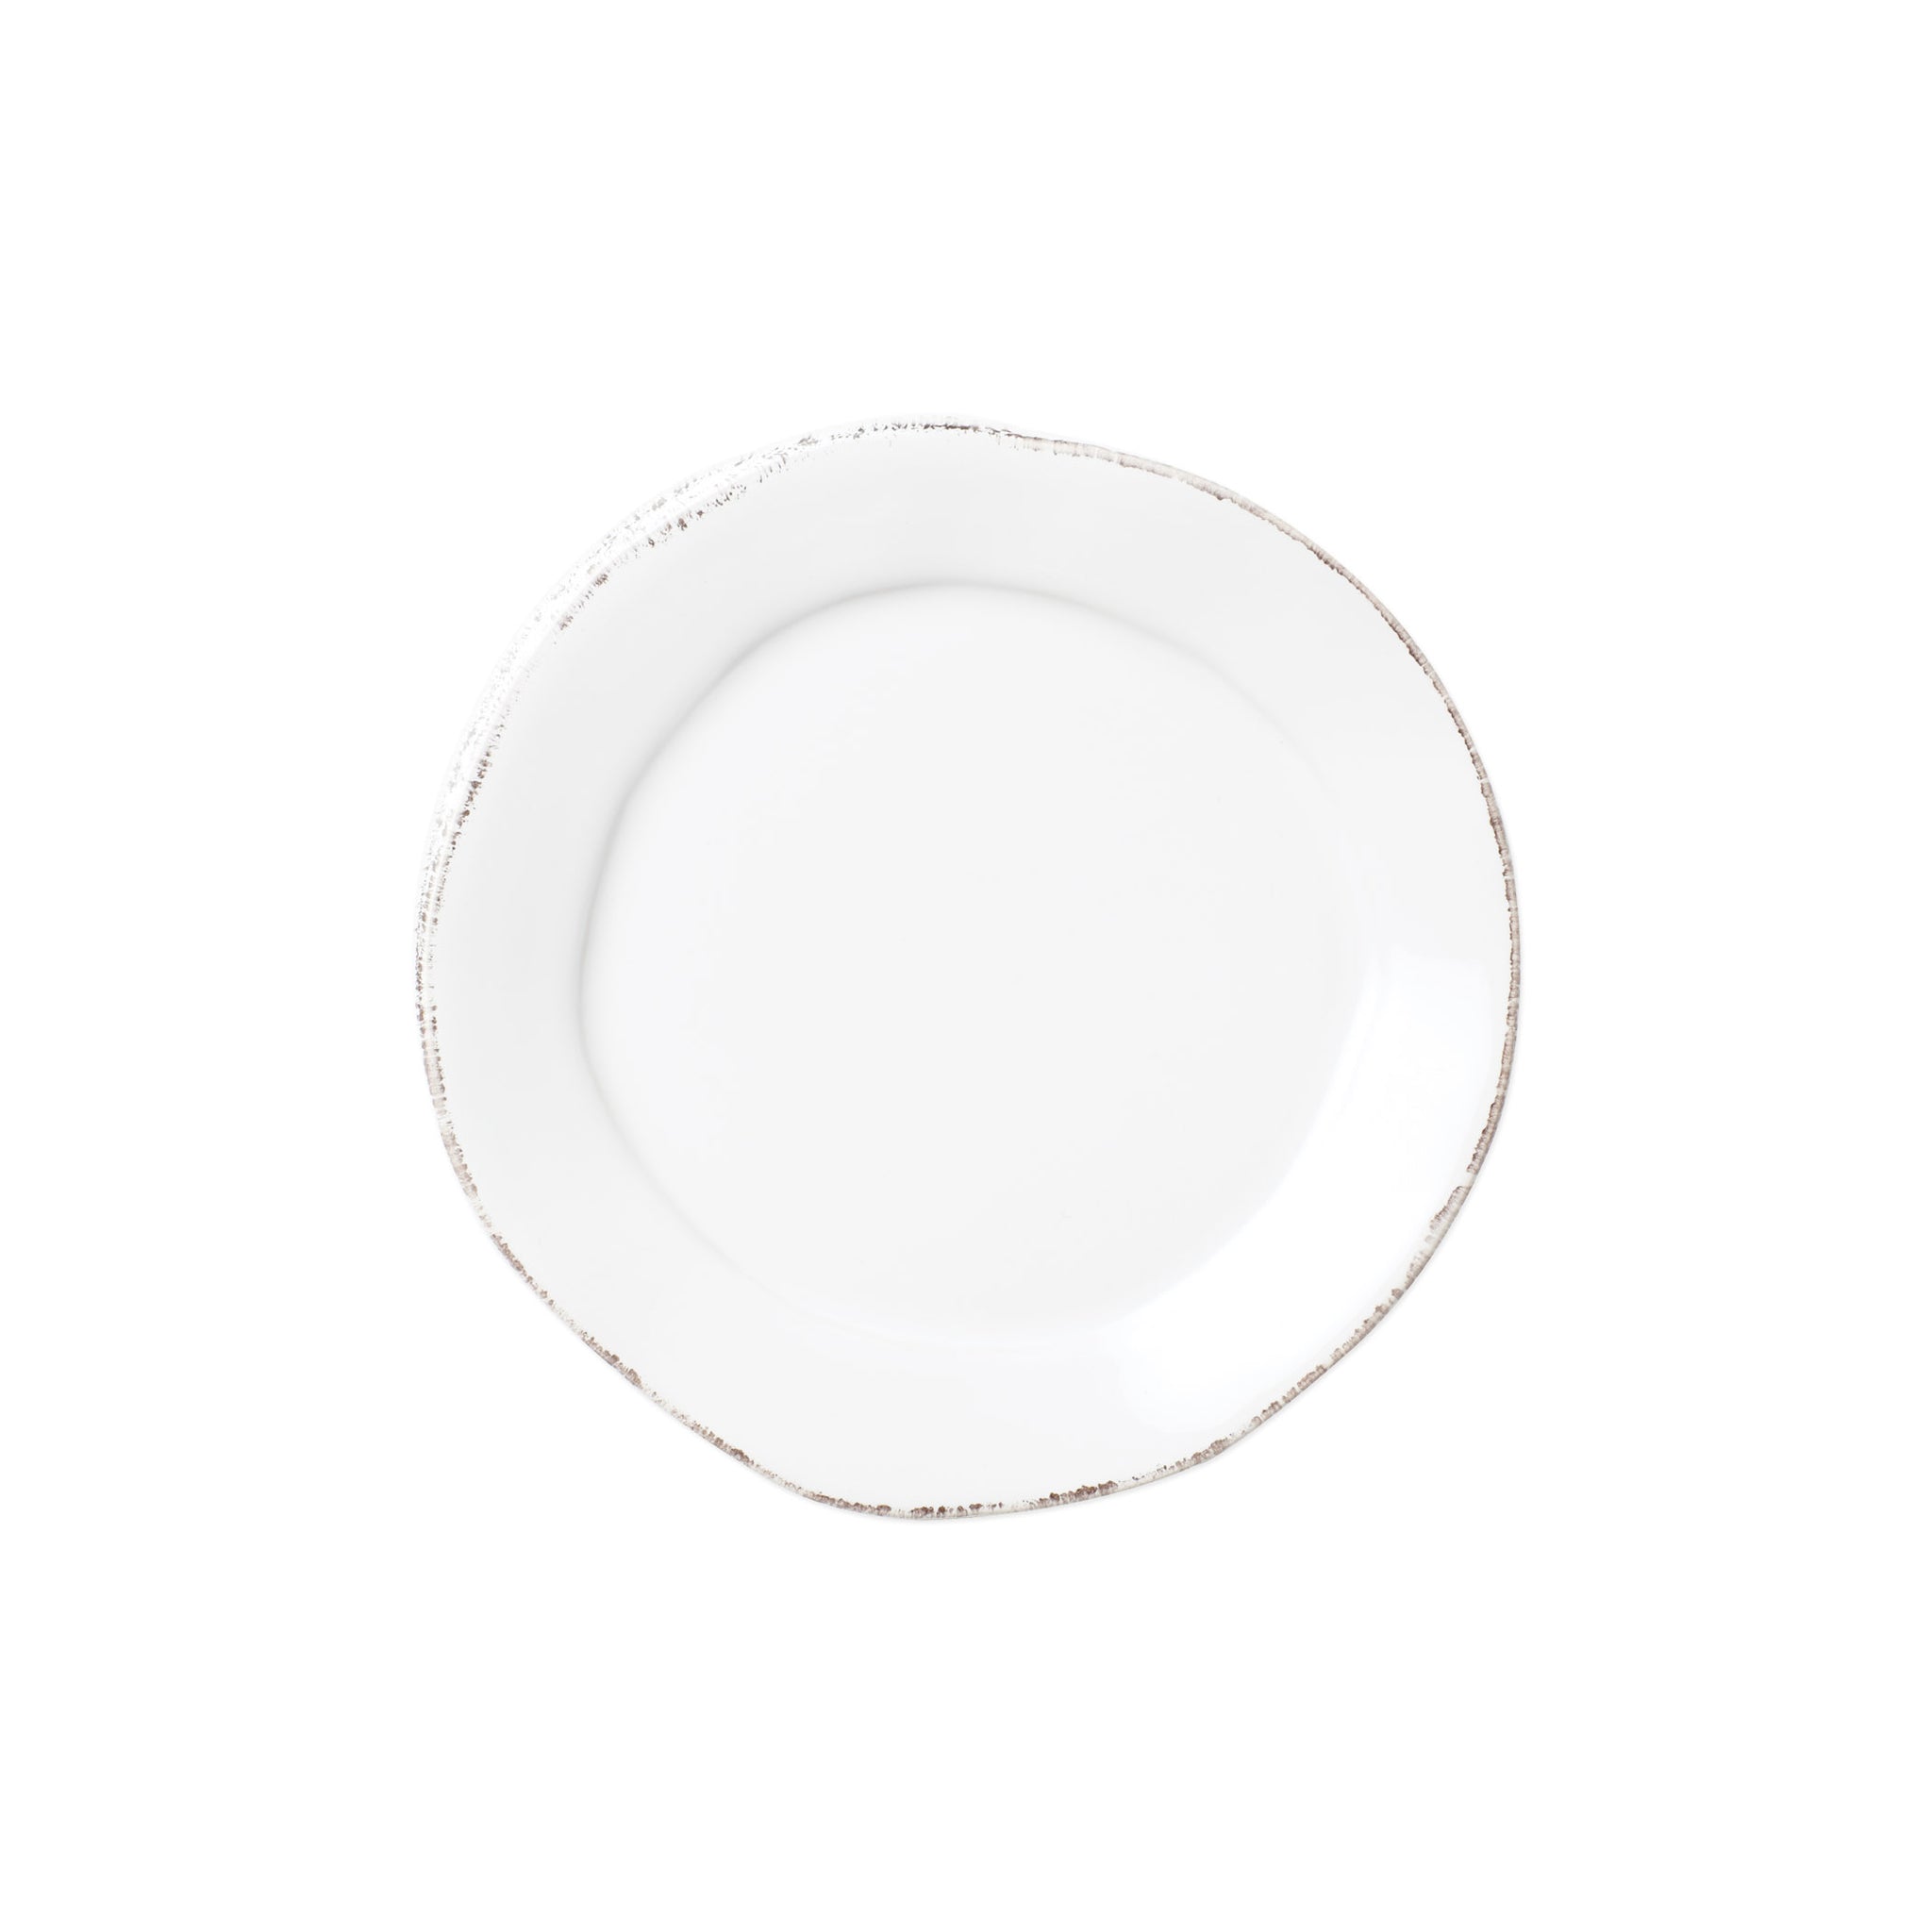 Lastra Canape Plate - Set of 4 - White